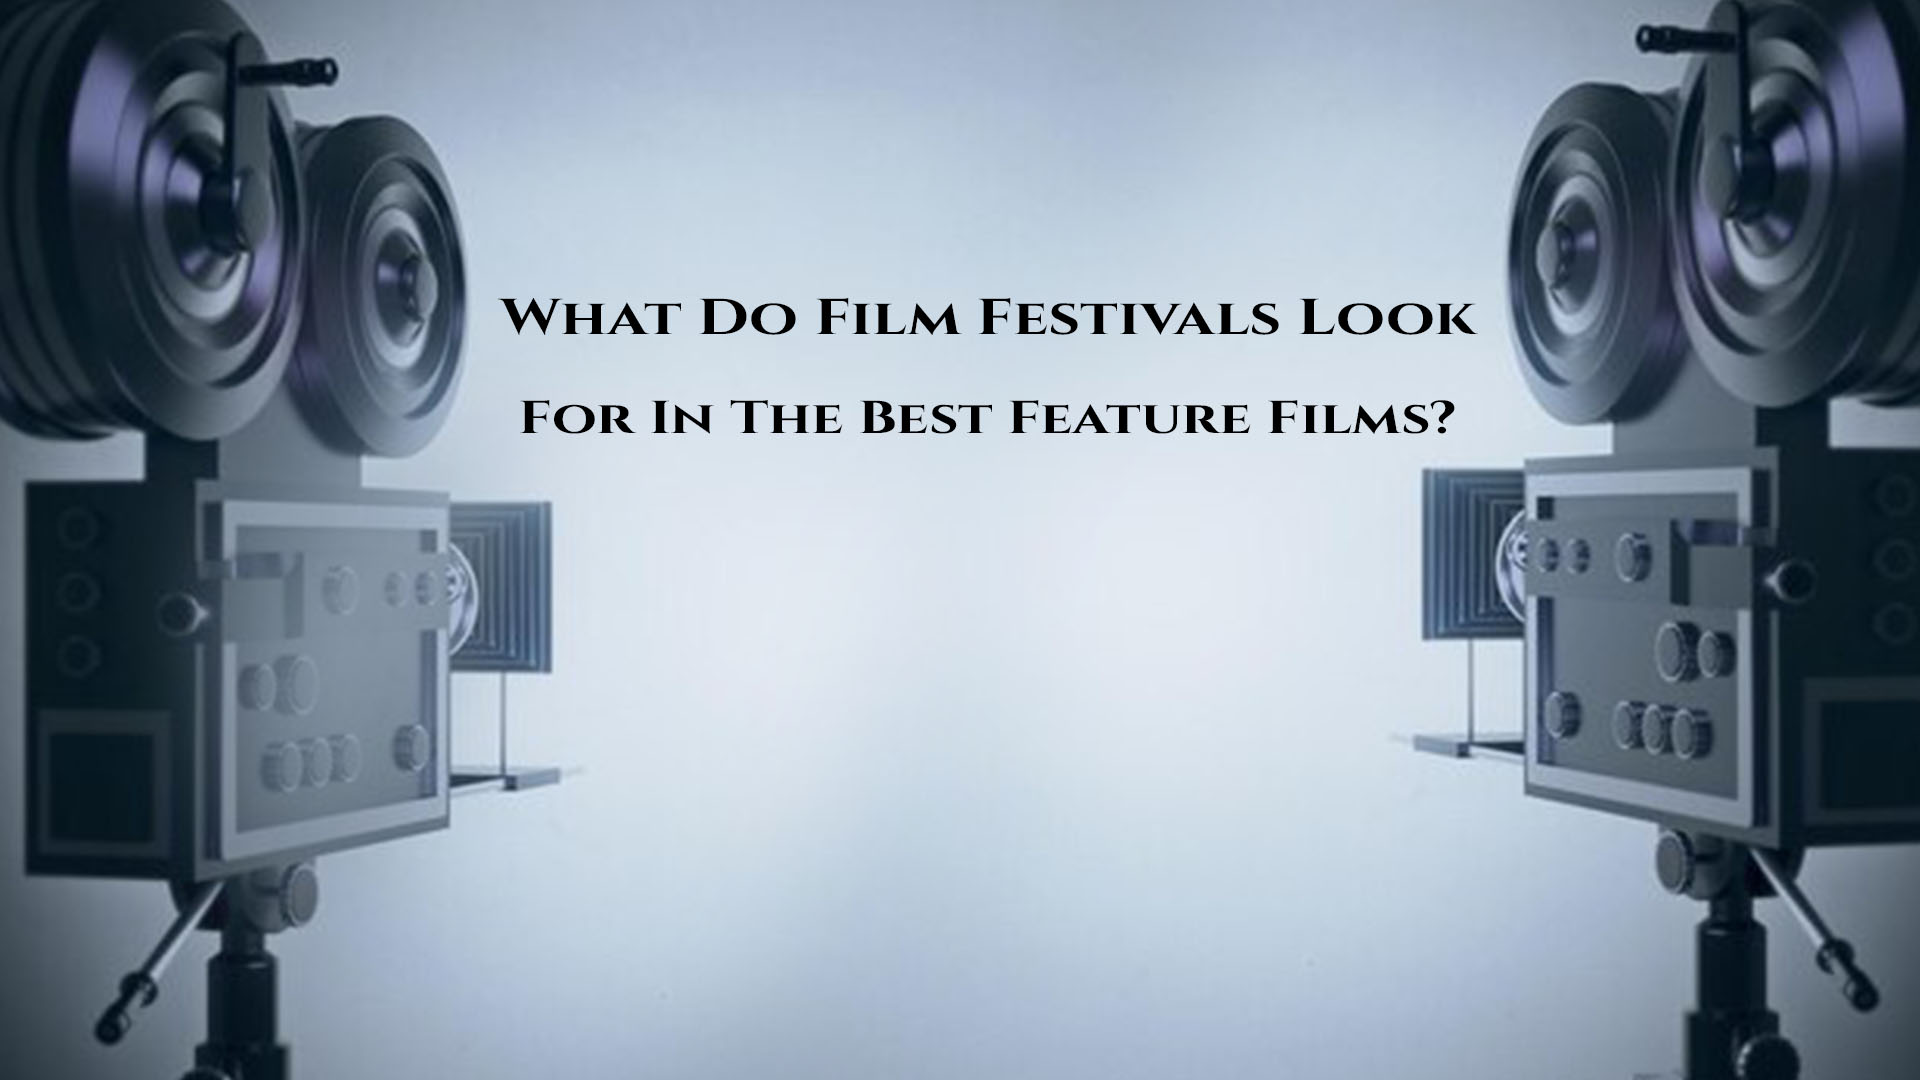 What Do Film Festivals Look For In The Best Feature Films?